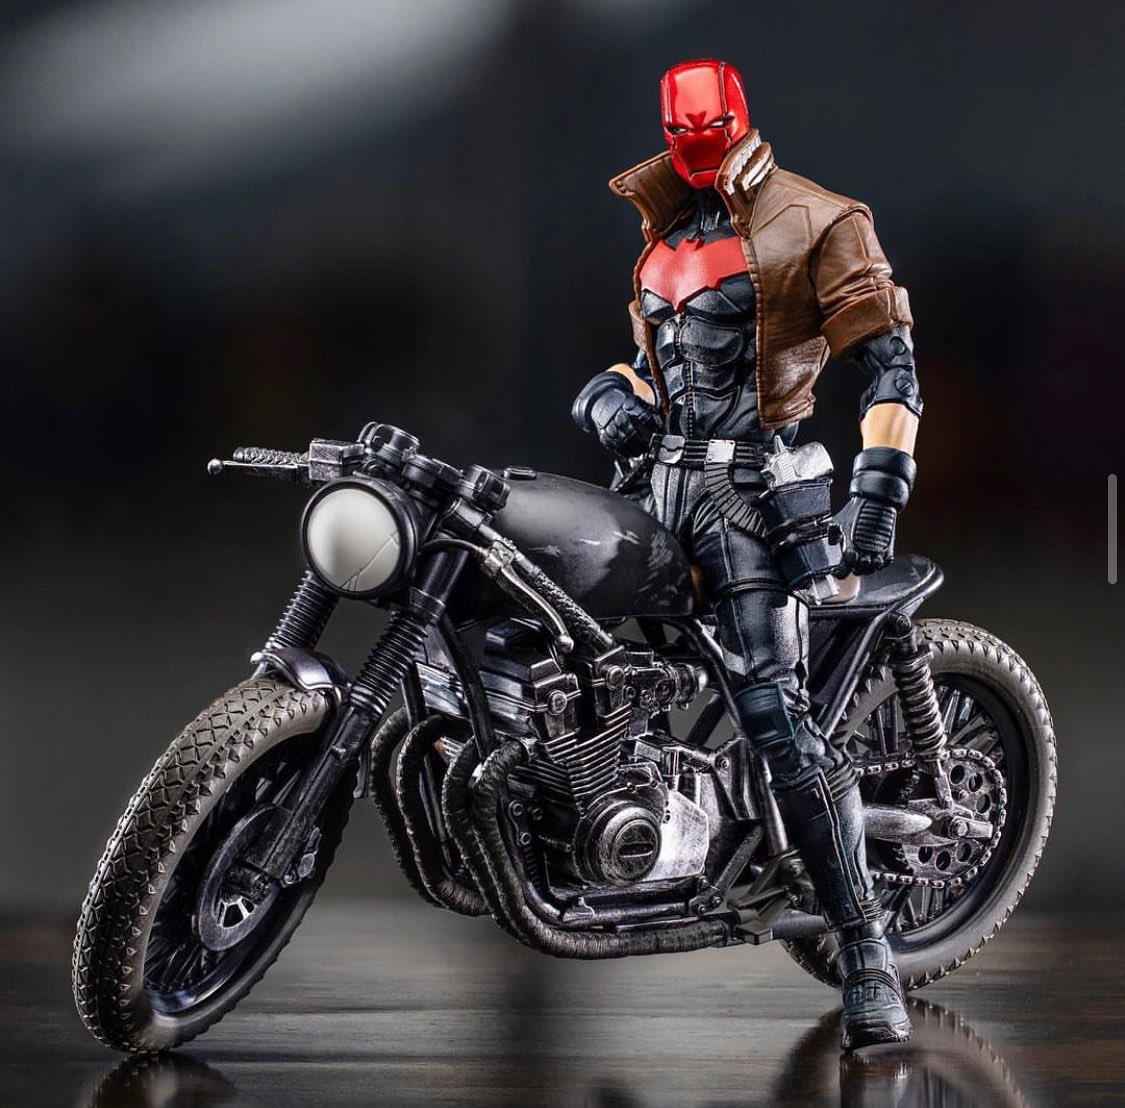 Red Hood on the Drifter motorcycle by @mcfarlanetoys 

#redhood #jasontodd #batman #driftermotorcycle #batfamily #darkknight #dcmultiverse #dccollectibles #dccomics #thebatman #dcuniverse #dccollection #dccollector #actionfigure #actionfigurephotography